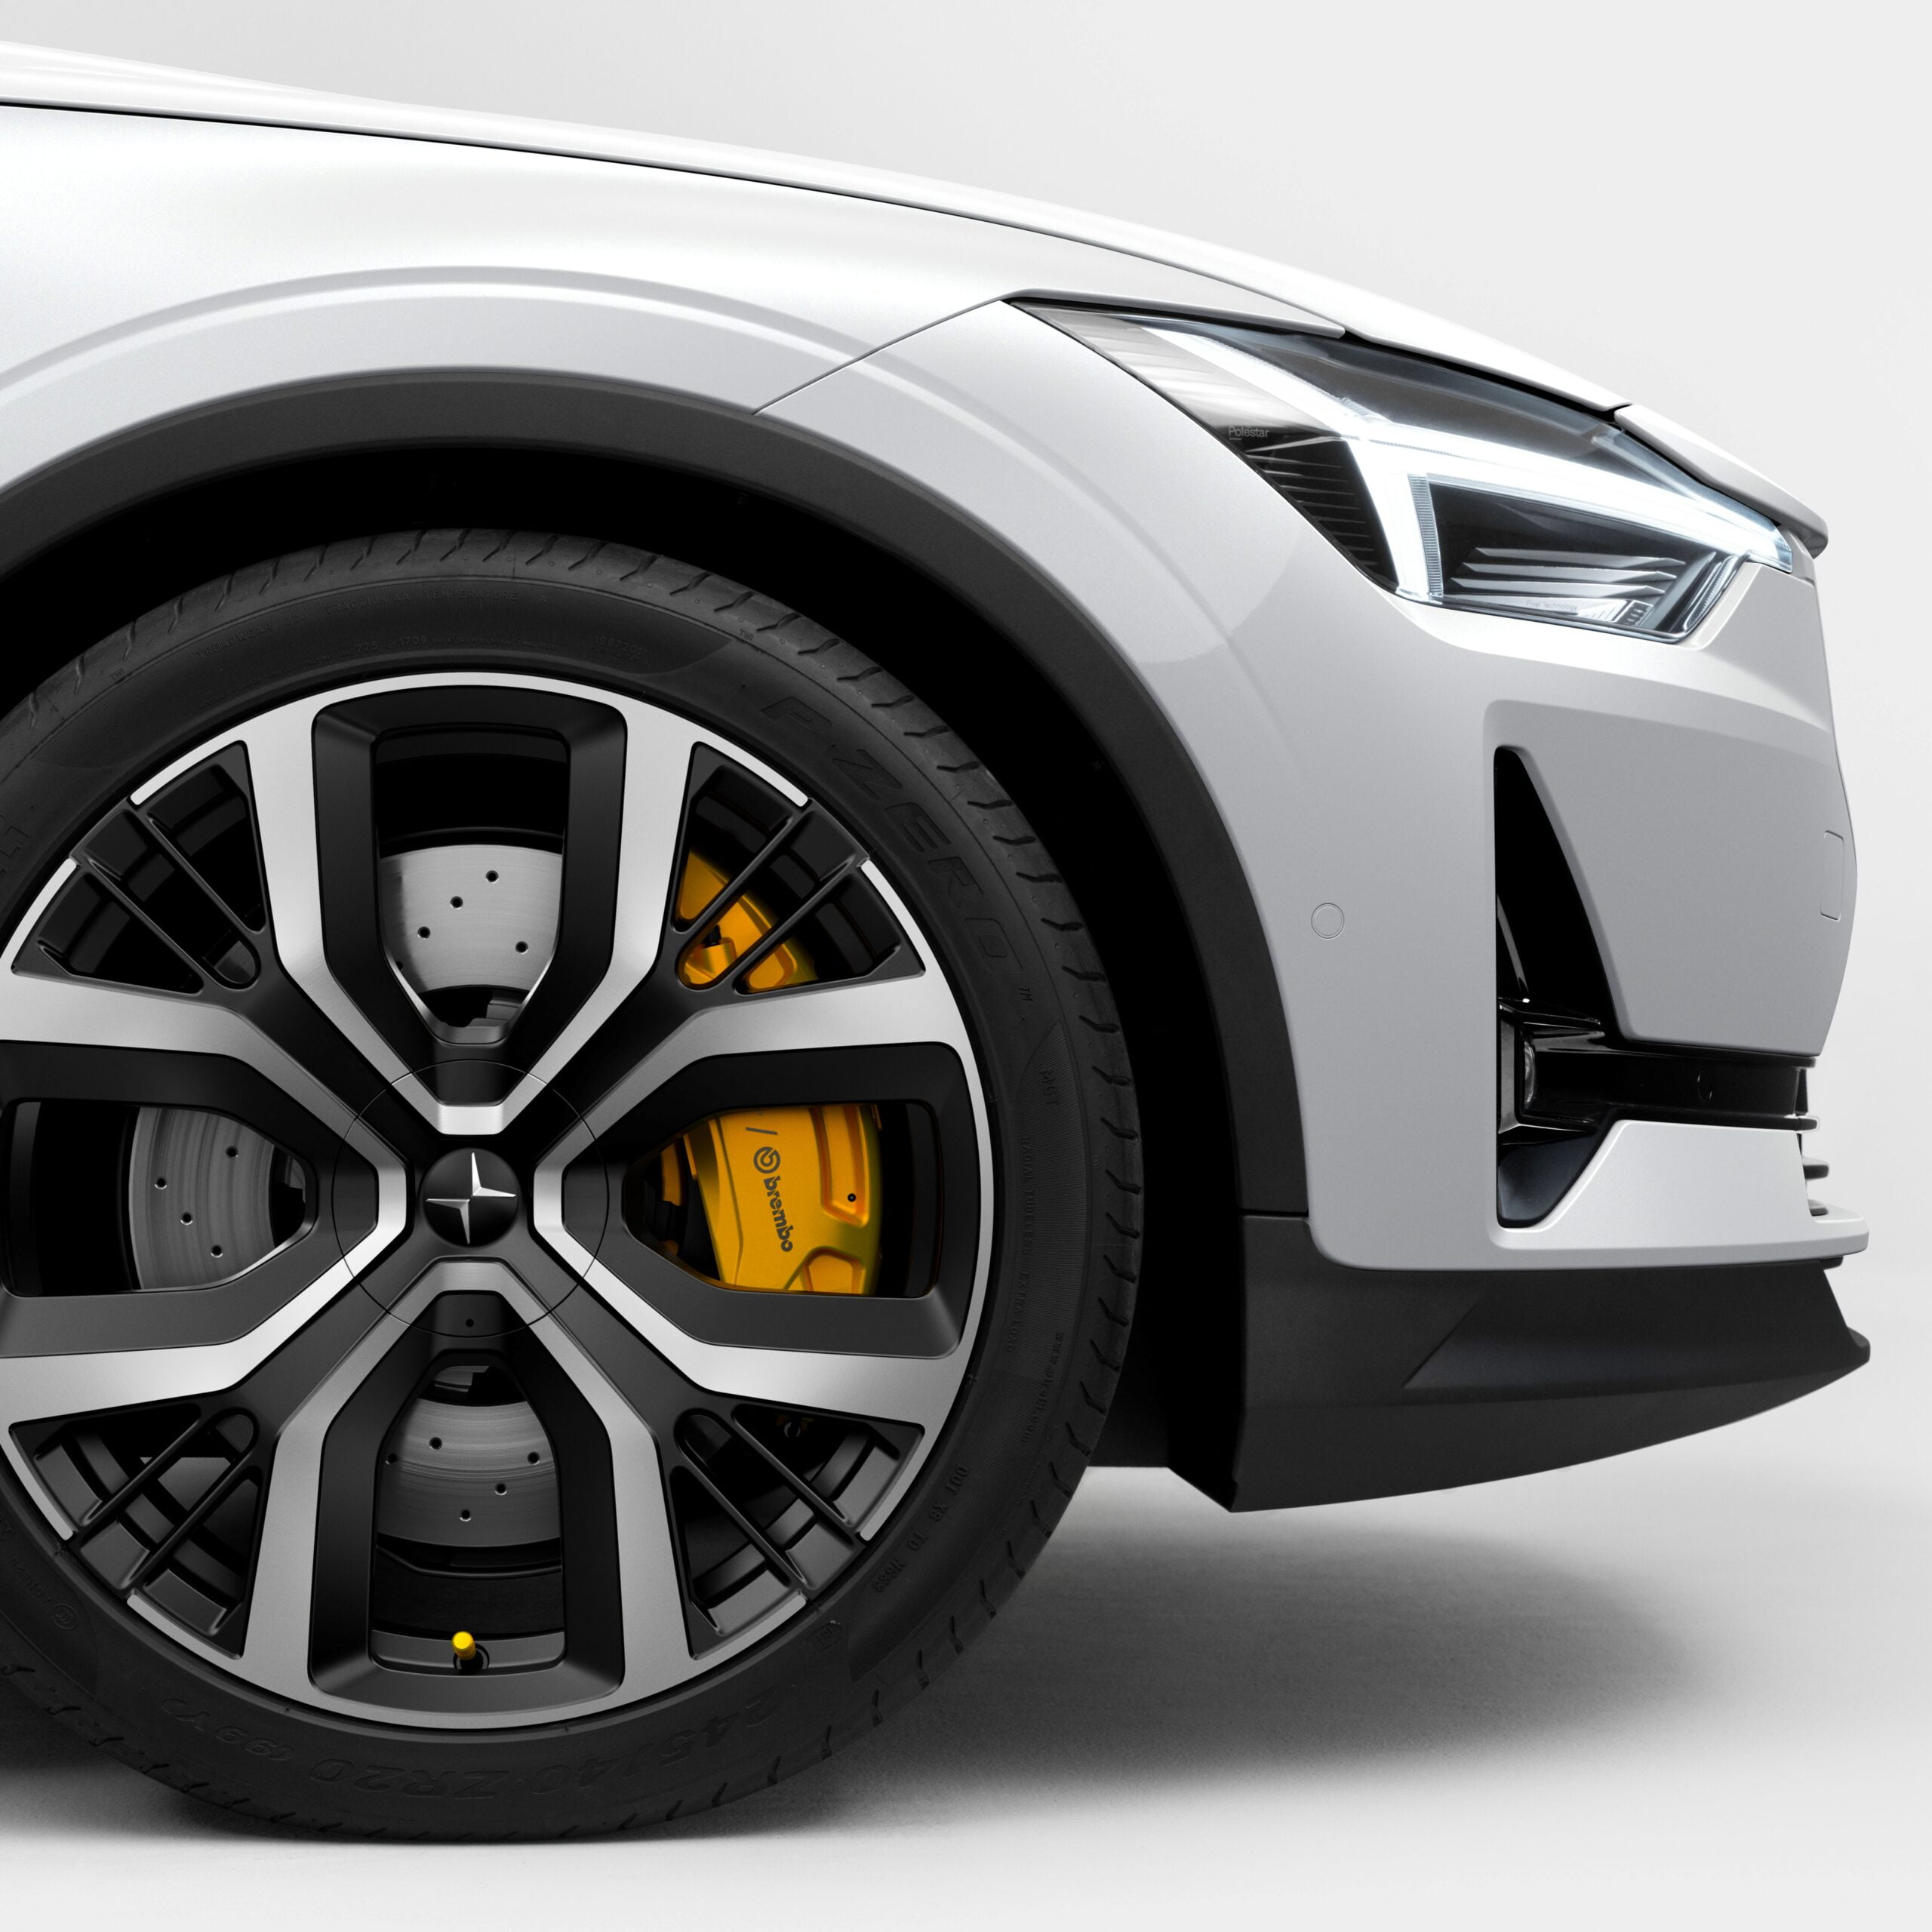 2023 Polestar 2 images of electric car via Matt Rhodes (Extension PR) for use by 360 Magazine